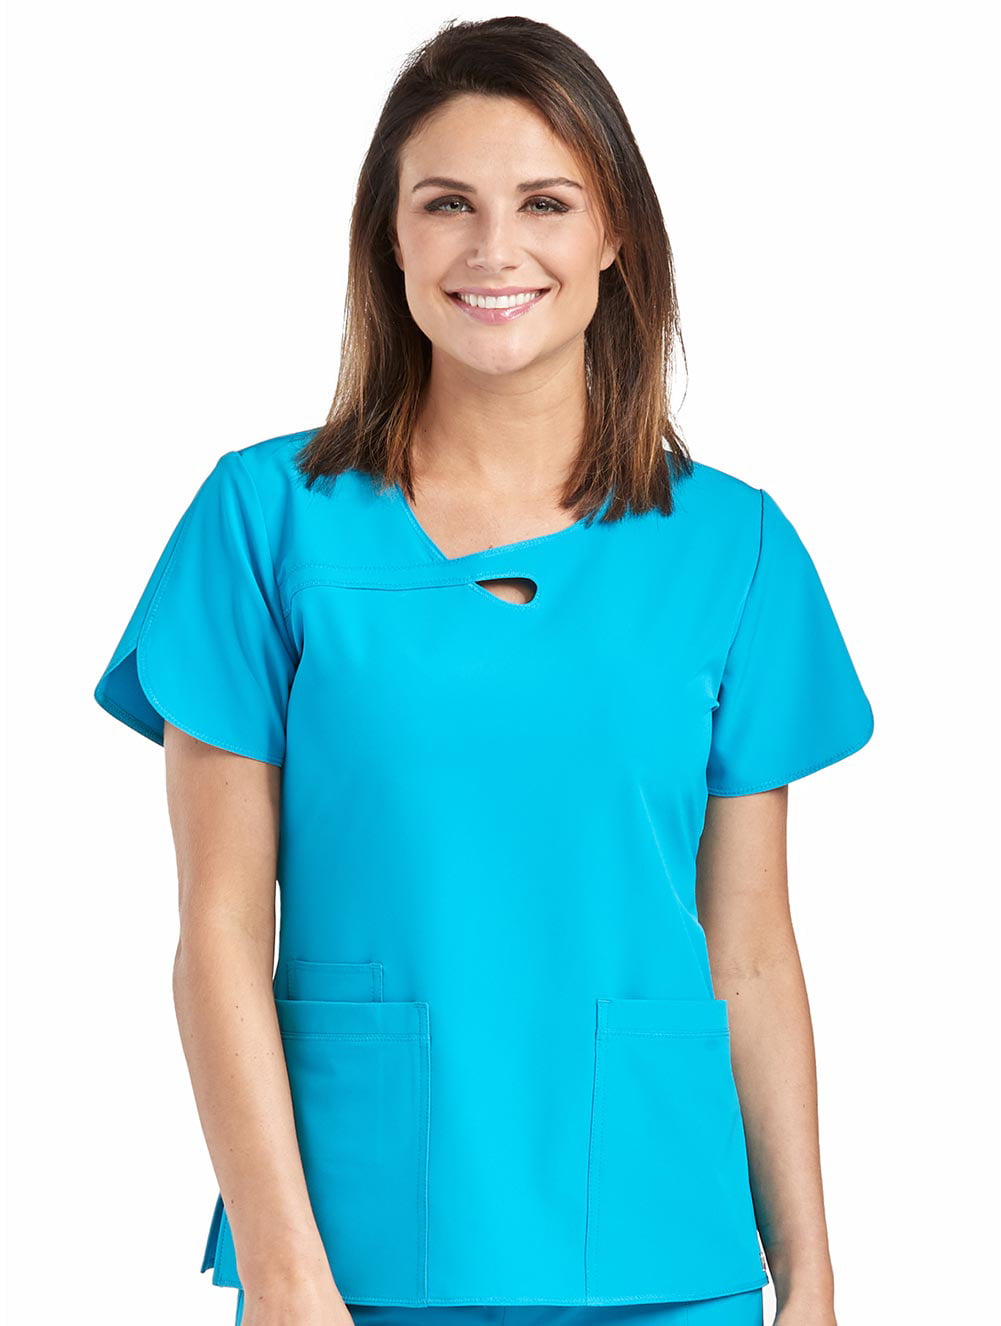 Med Couture - Med Couture Keyhole Neckline Impact Top Scrub Top ...